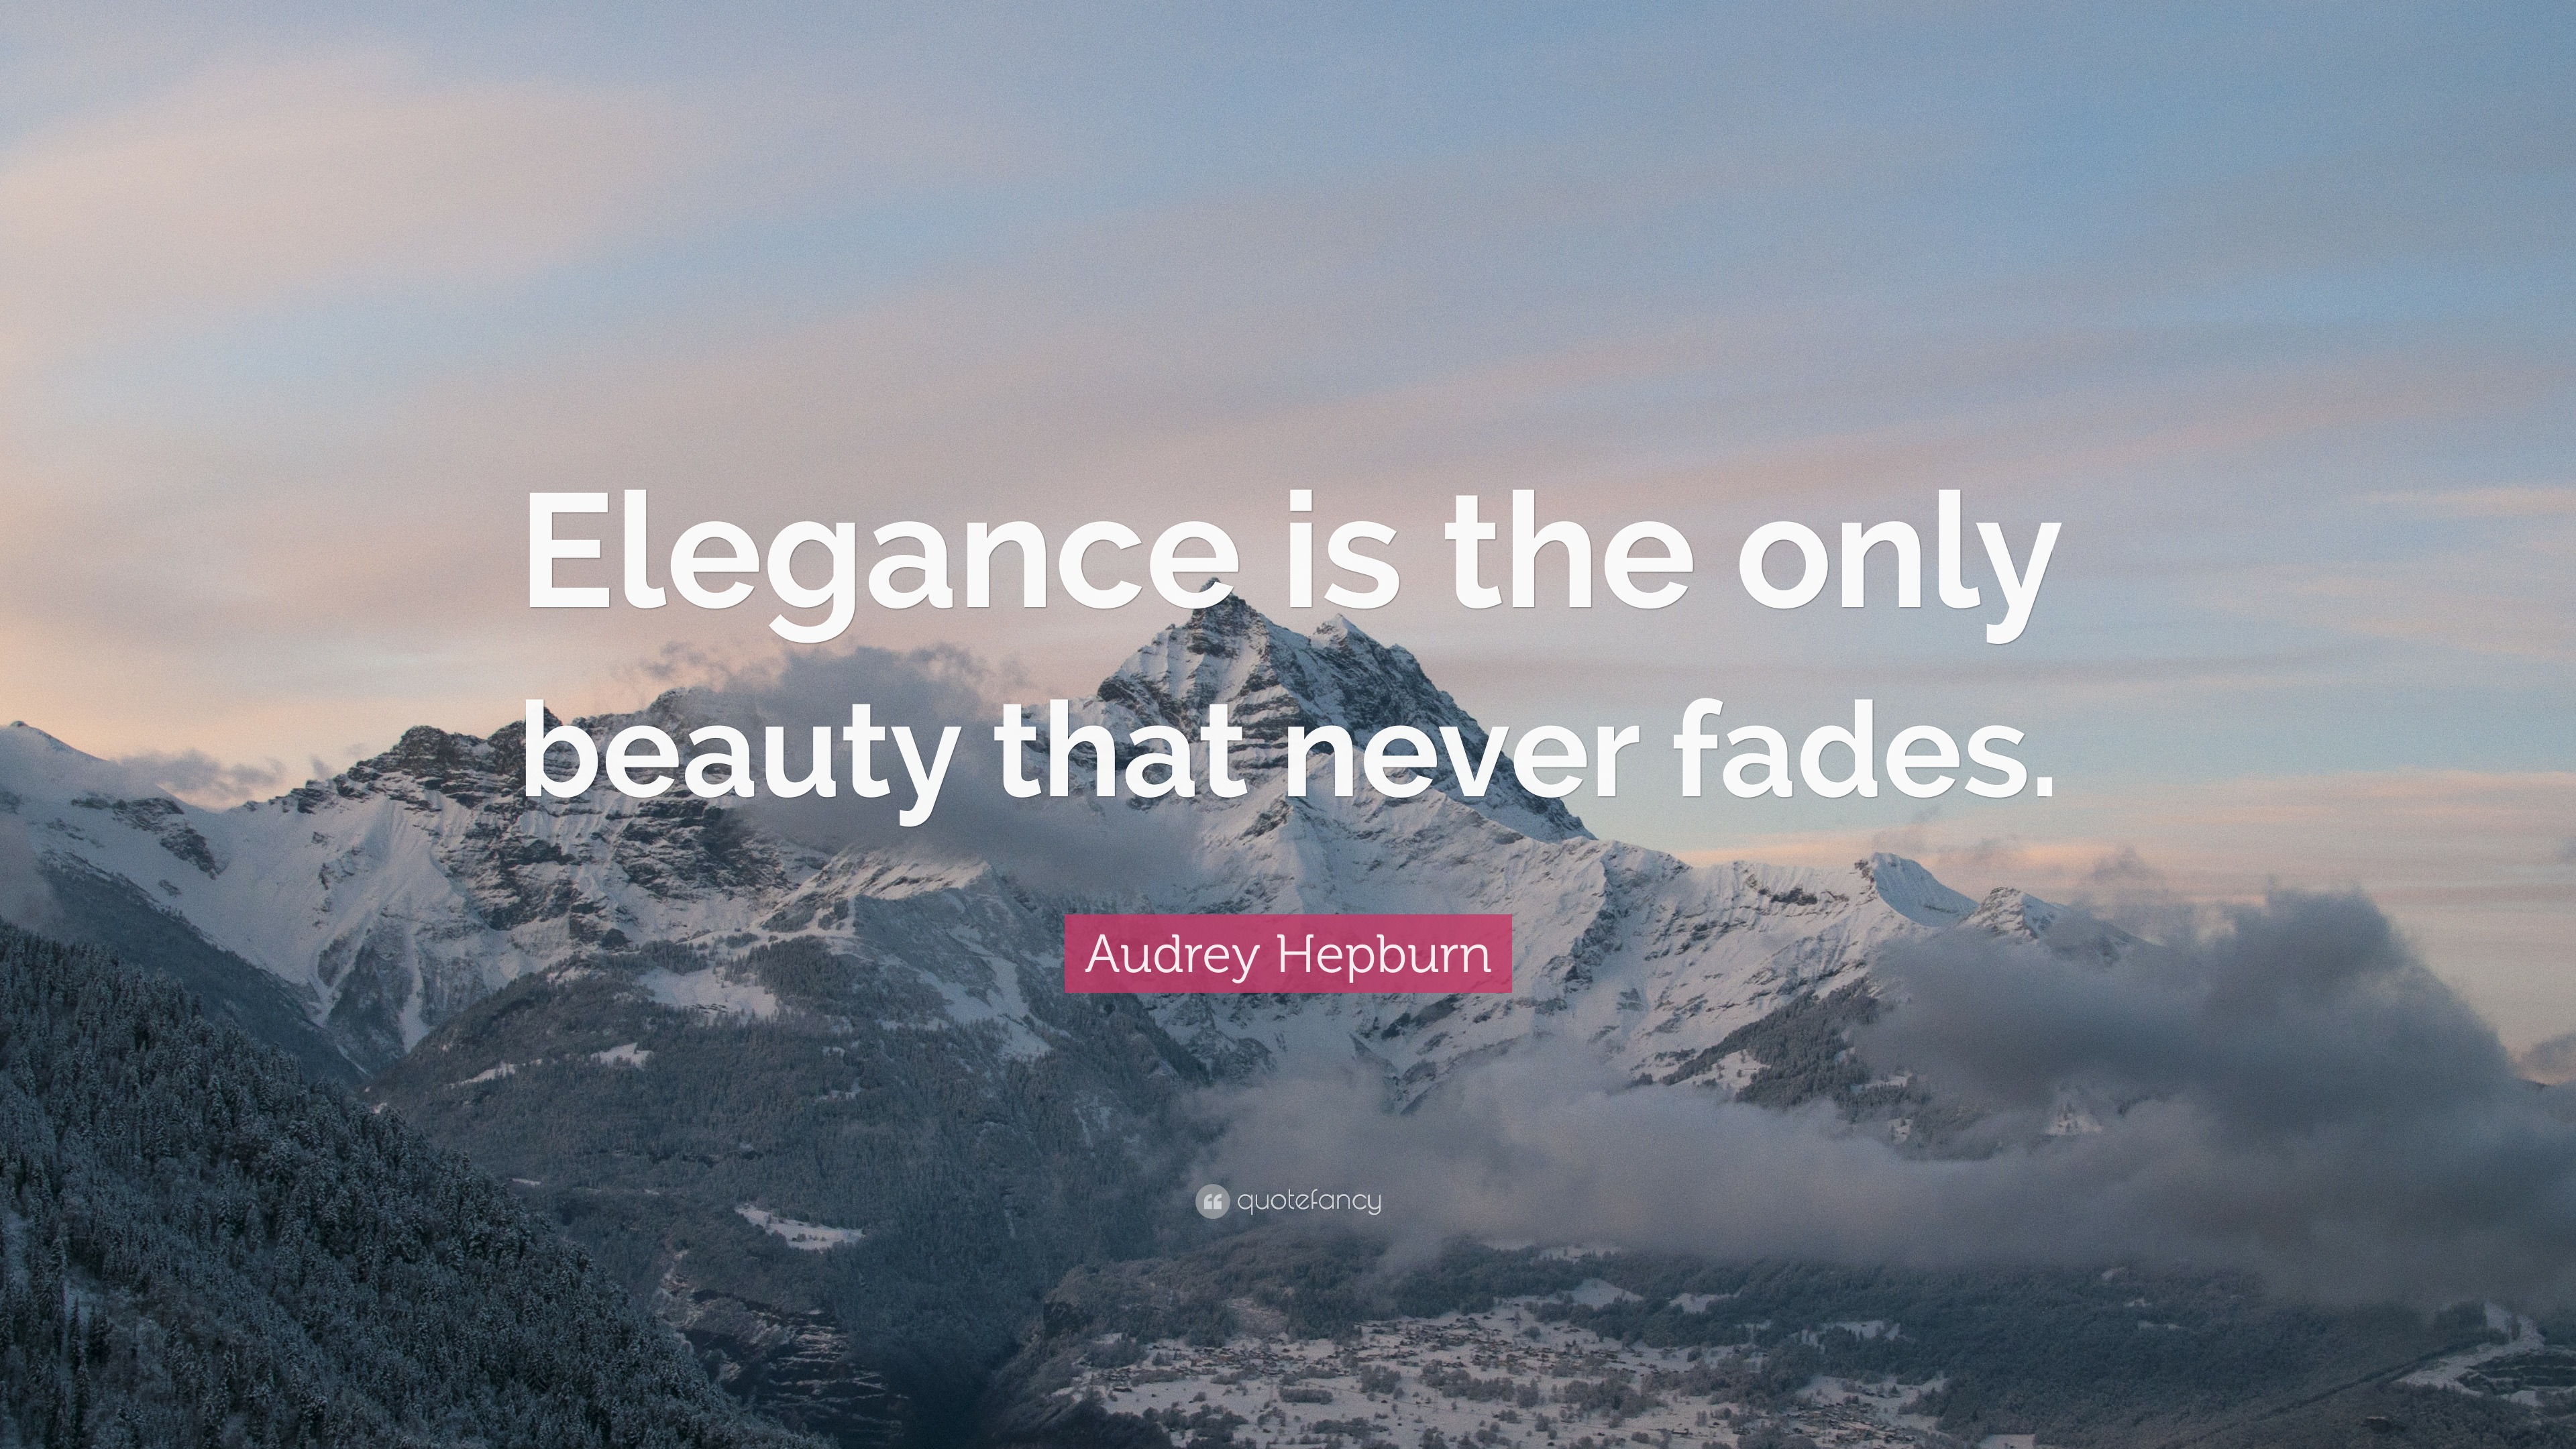 Elegance is the only beauty that never fades - Audrey Hepburn' I'm